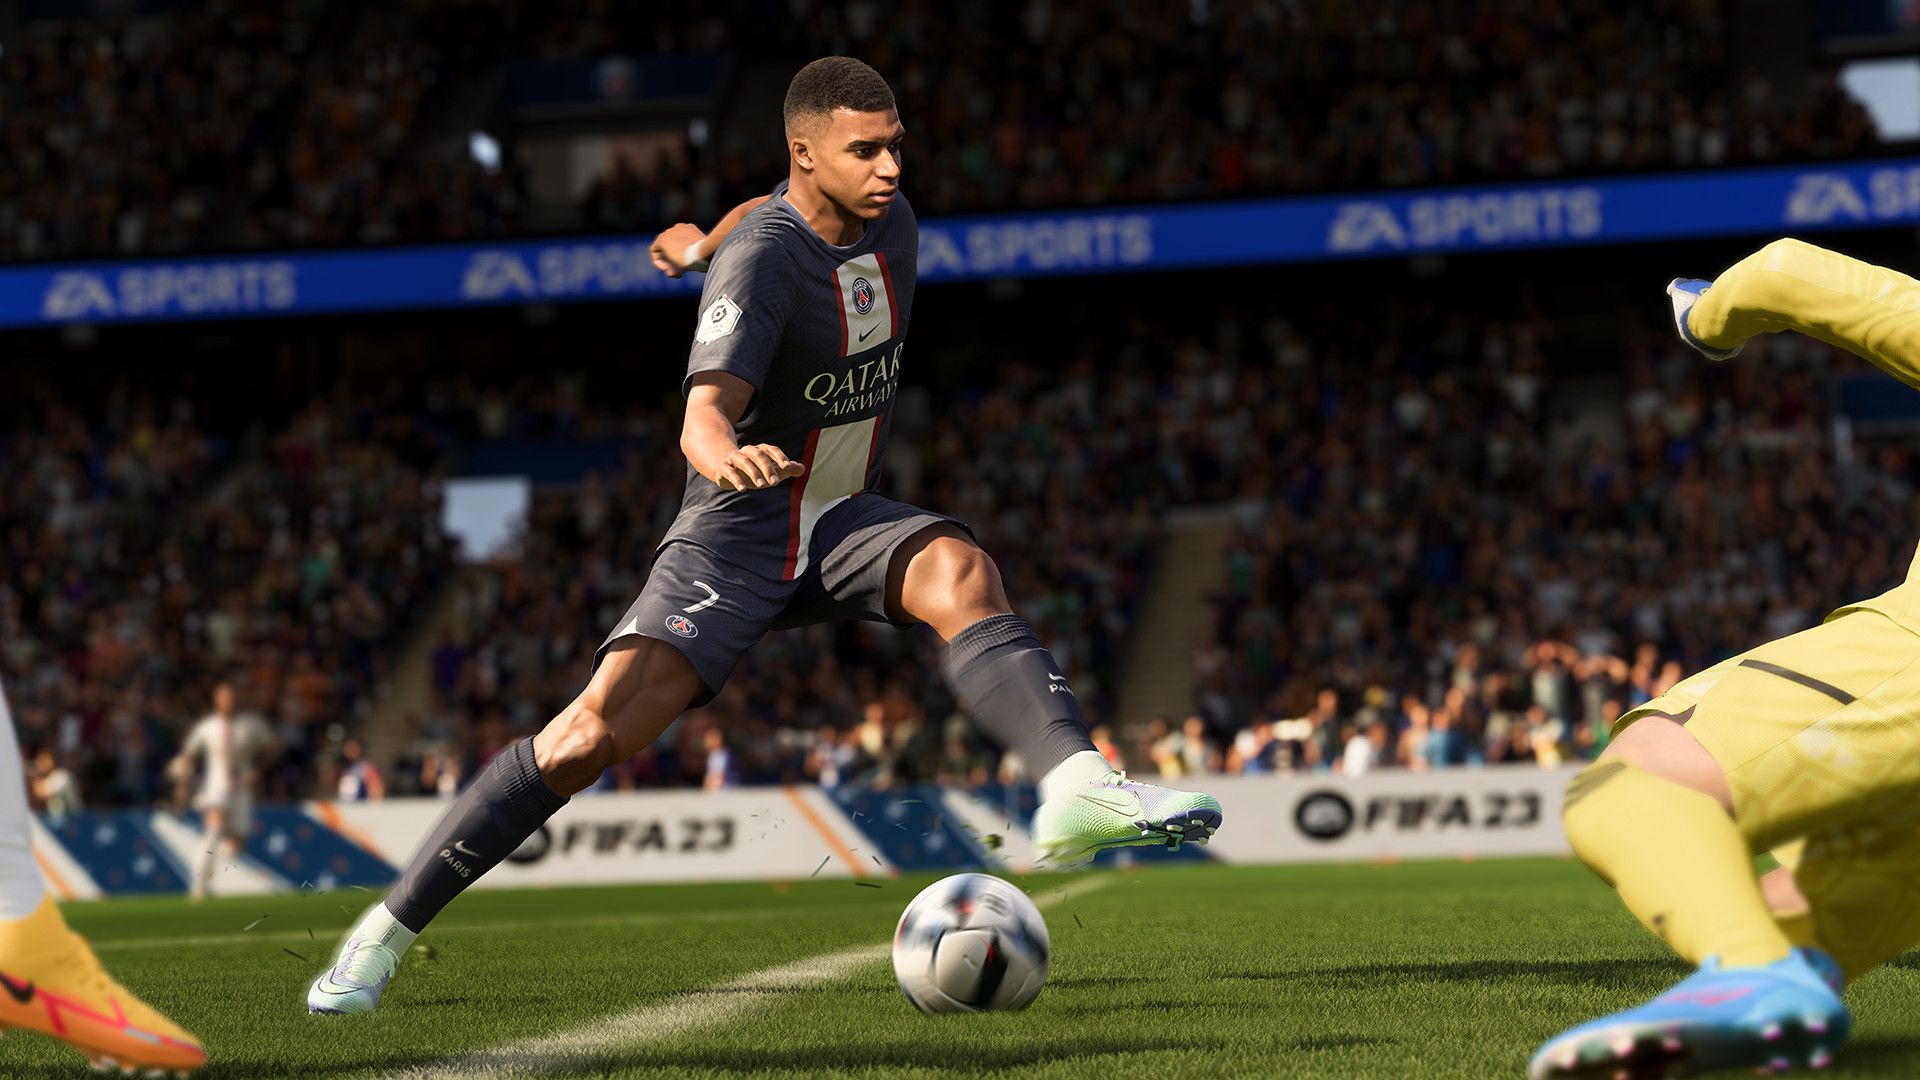 Buy FIFA 23 Points PS4 Compare Prices